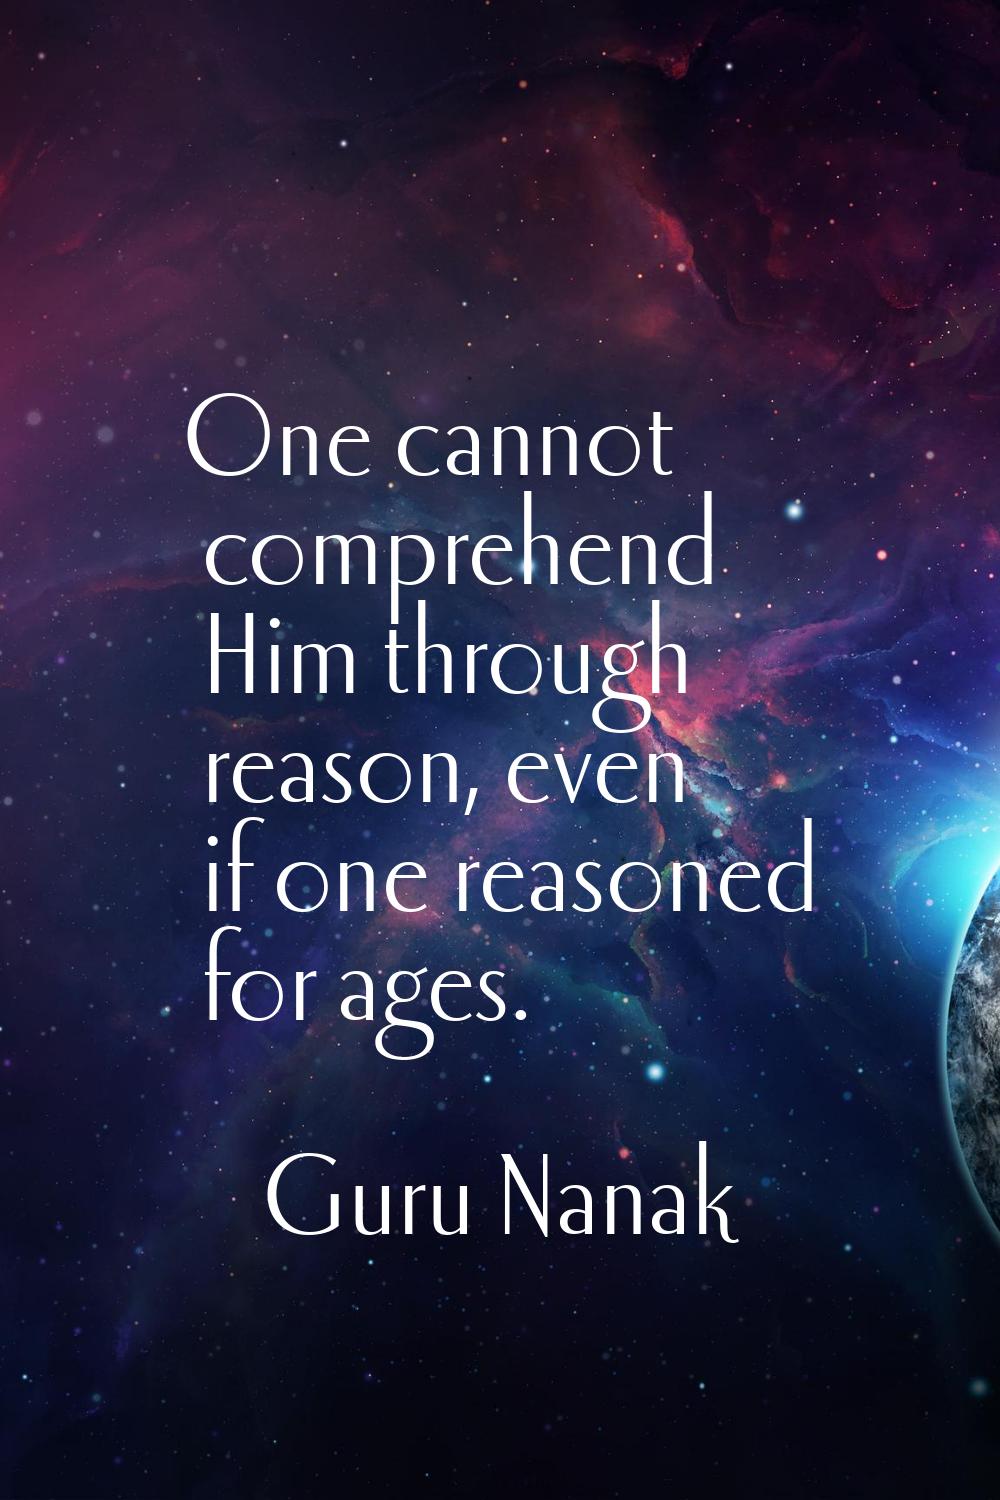 One cannot comprehend Him through reason, even if one reasoned for ages.